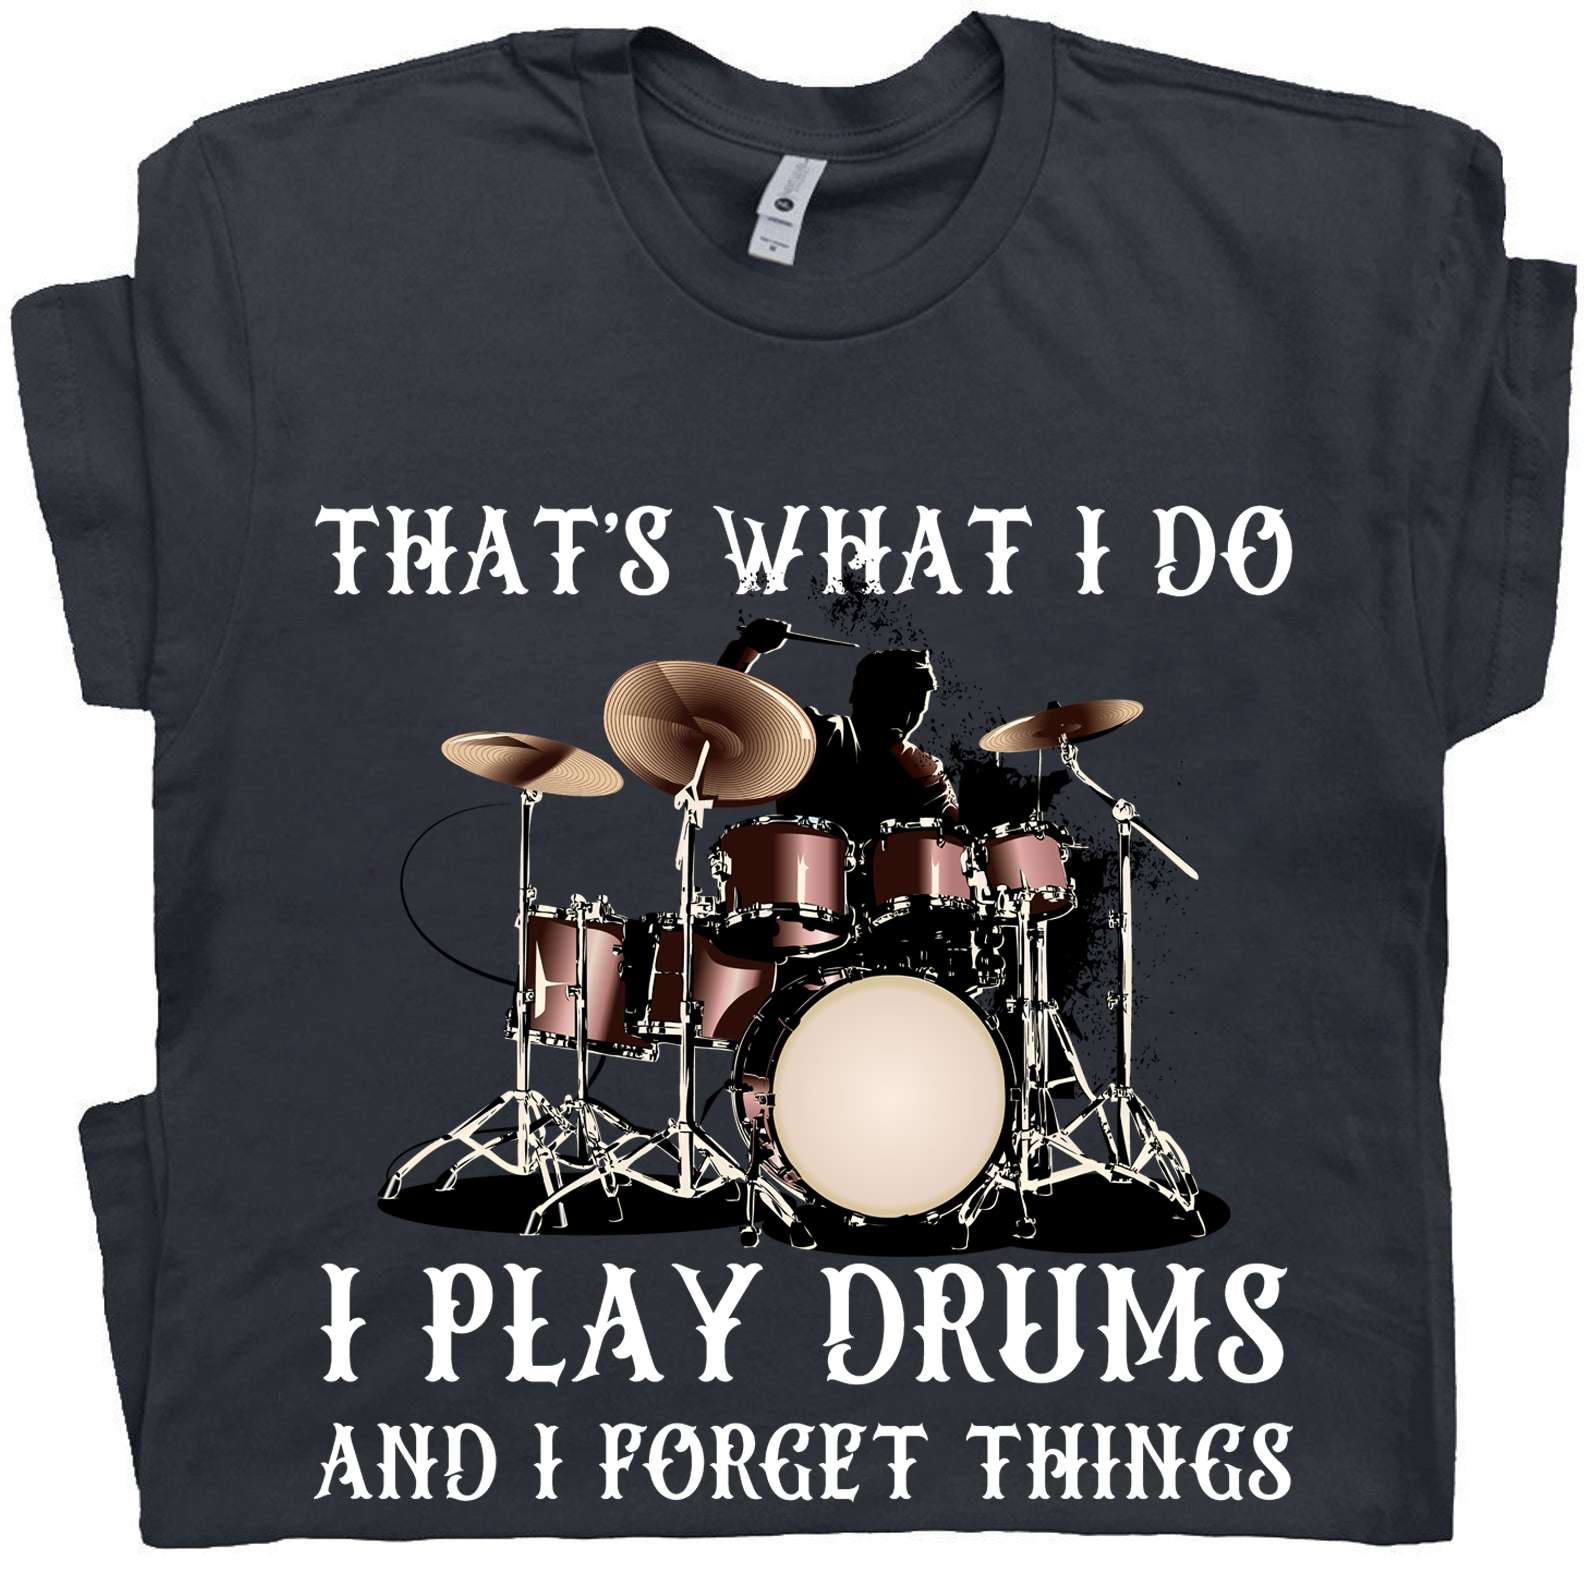 That's what I do I play drums and I forget things - The drummer, playing drum passionate